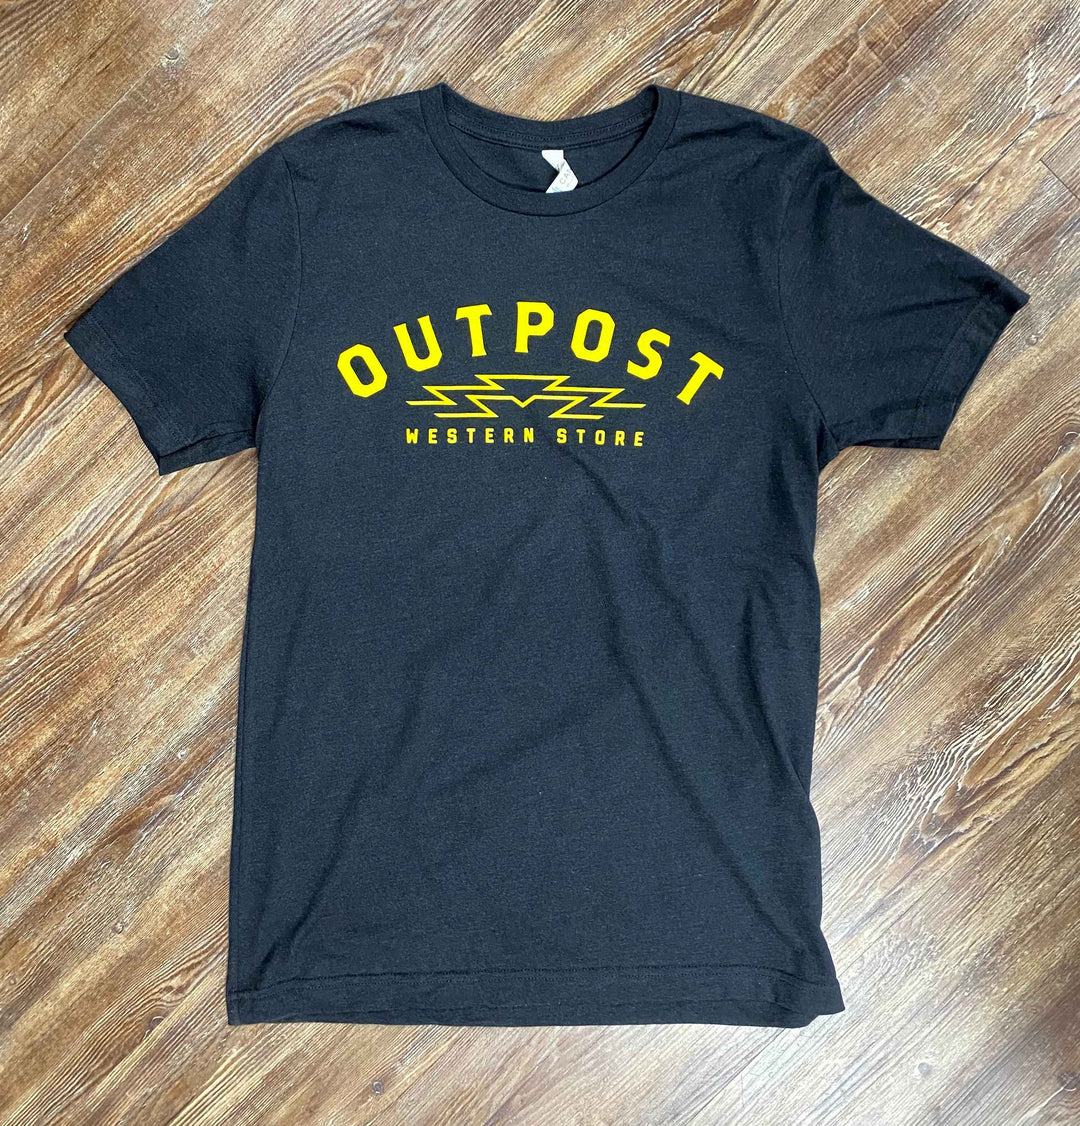 Outpost Sunrise Logo Tee, black heather with yellow gold screen print